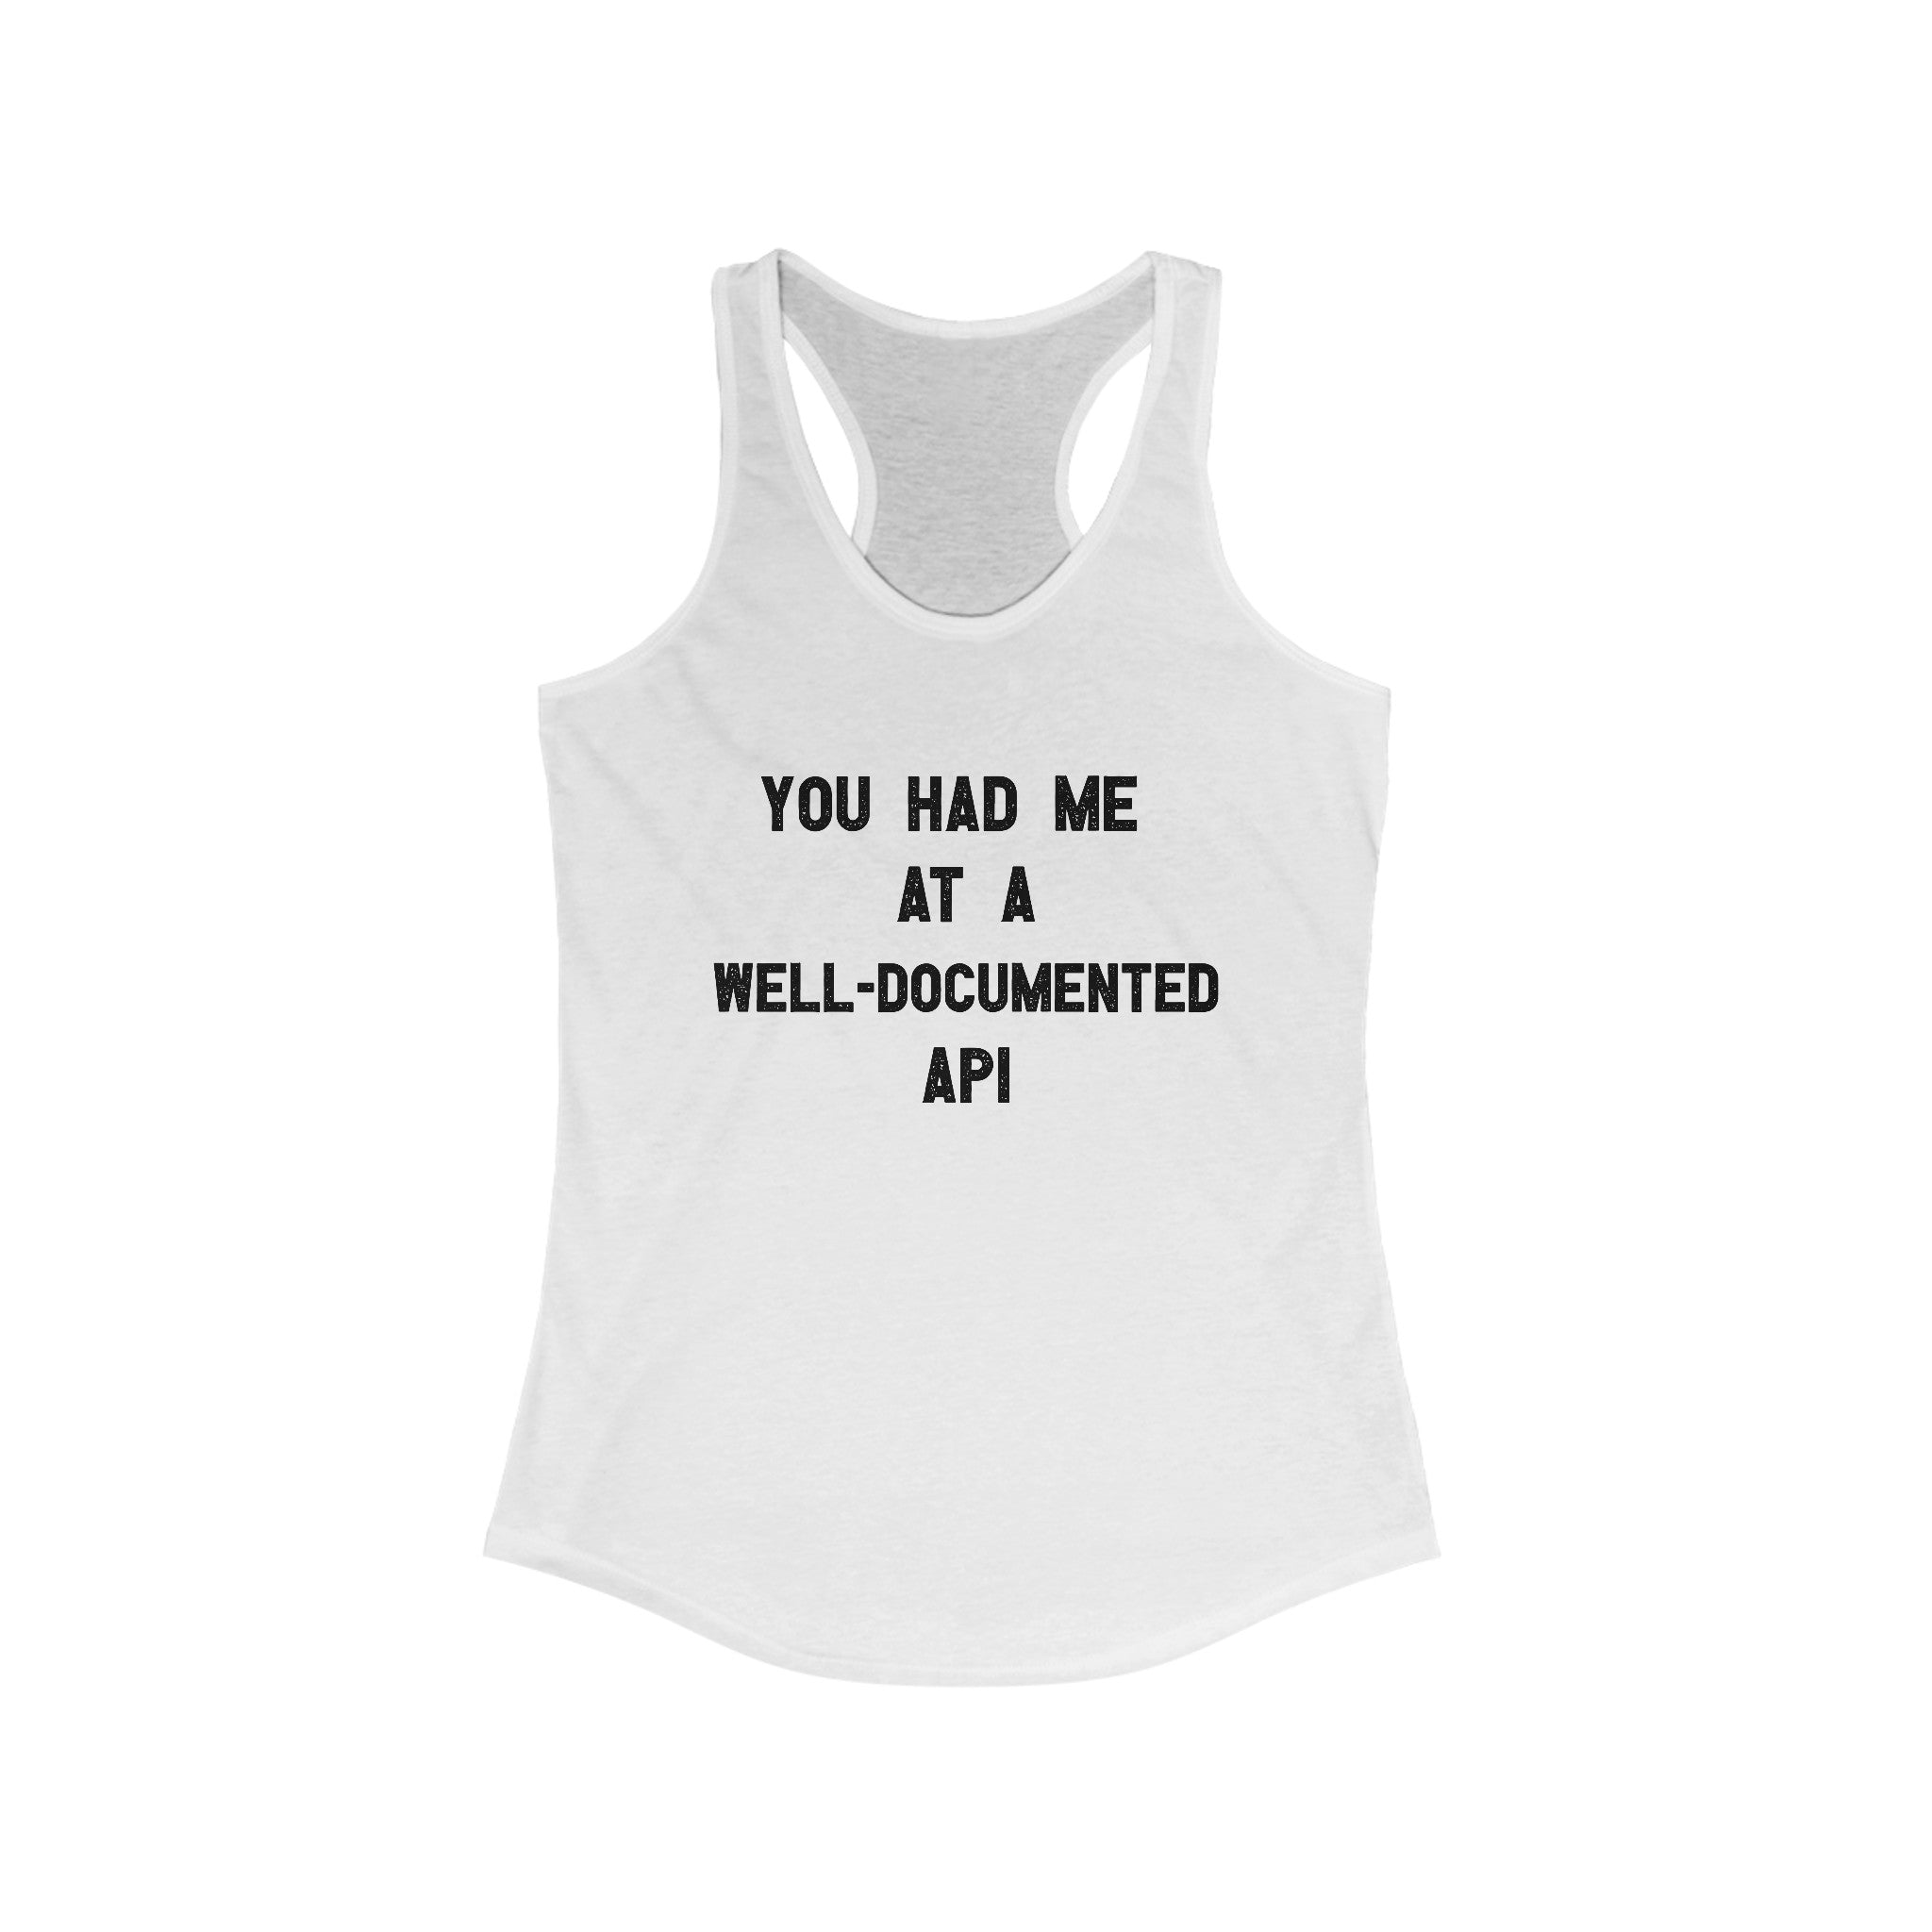 You Had Me At A Well-Documented API - Women's Racerback Tank